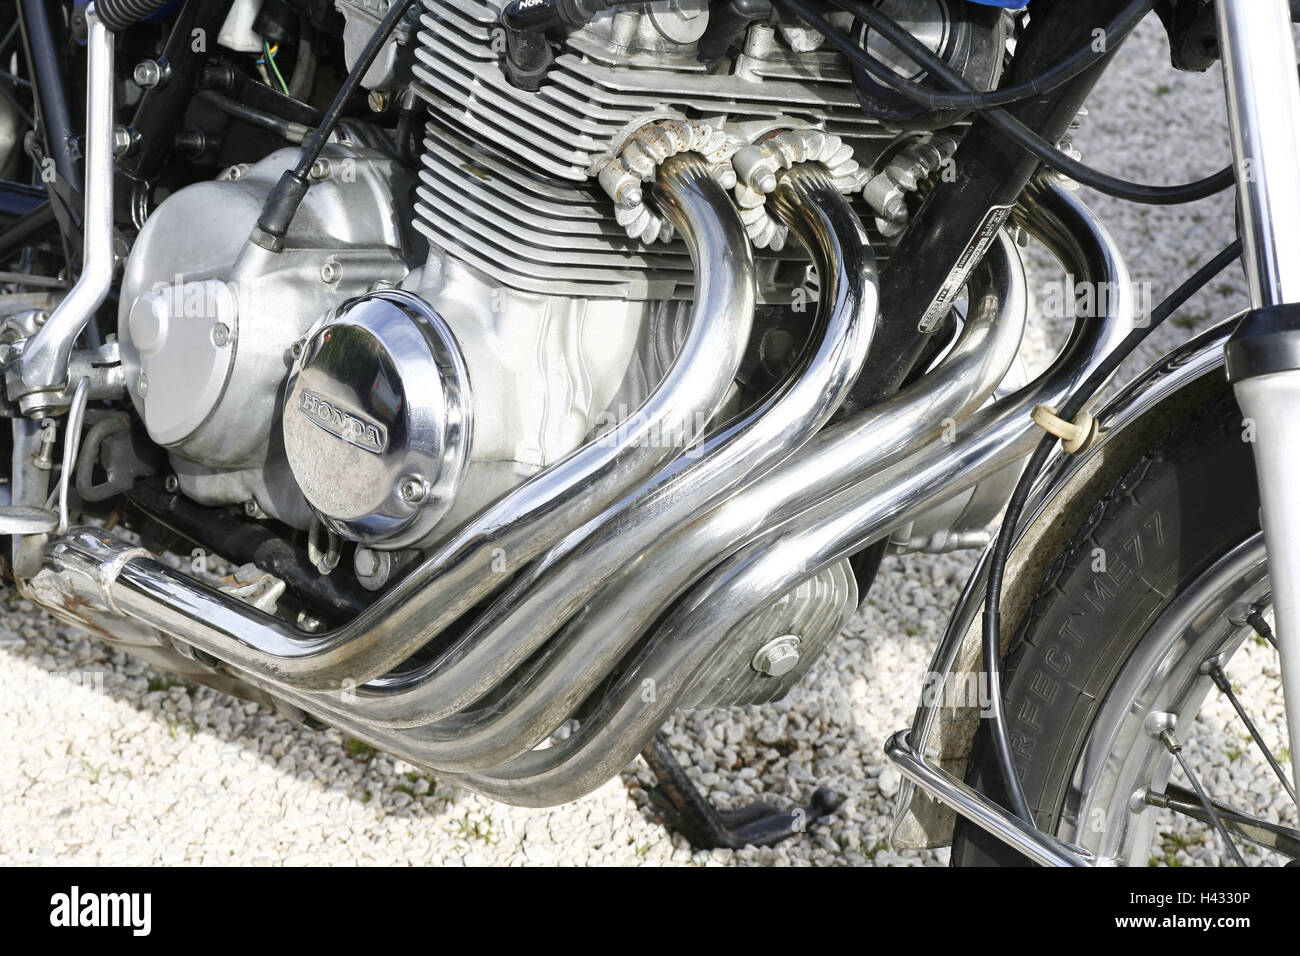 Honda 'CB Four', motorcycle, detail, engine, elbow, chrome, from below Stock Photo